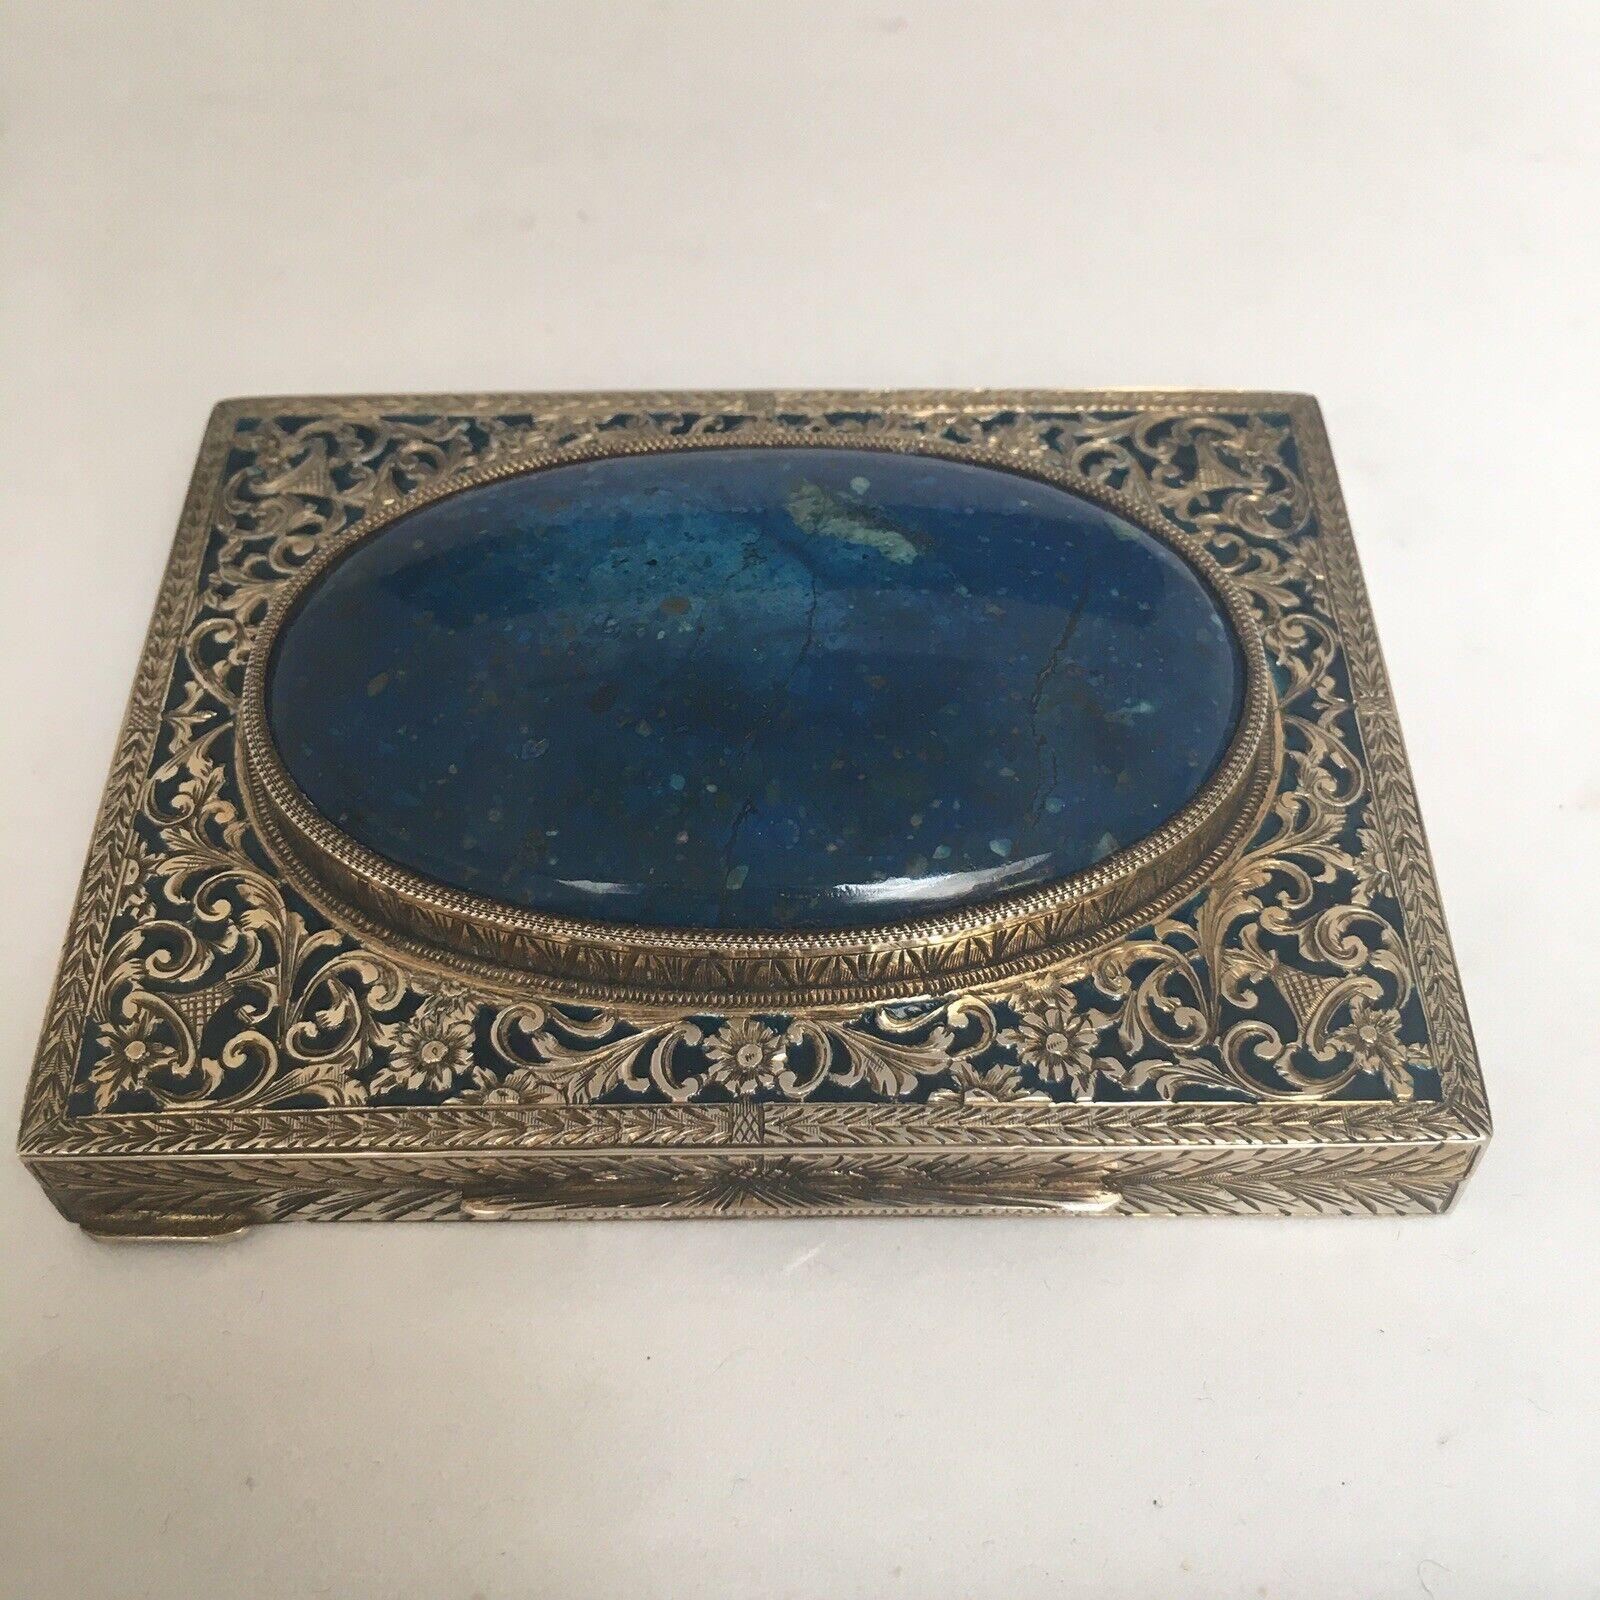 Italian Silver 3.75” by 2.75” by  3/16 “  Deep Sodalite 800 Silver Plique a Jour Enamel Box

152.9 Gram  
Sodalite
In good condition, no damage, no evidence of repairs 
Marked 800 and Italian hallmarks 
In good condition, no damage, no evidence of